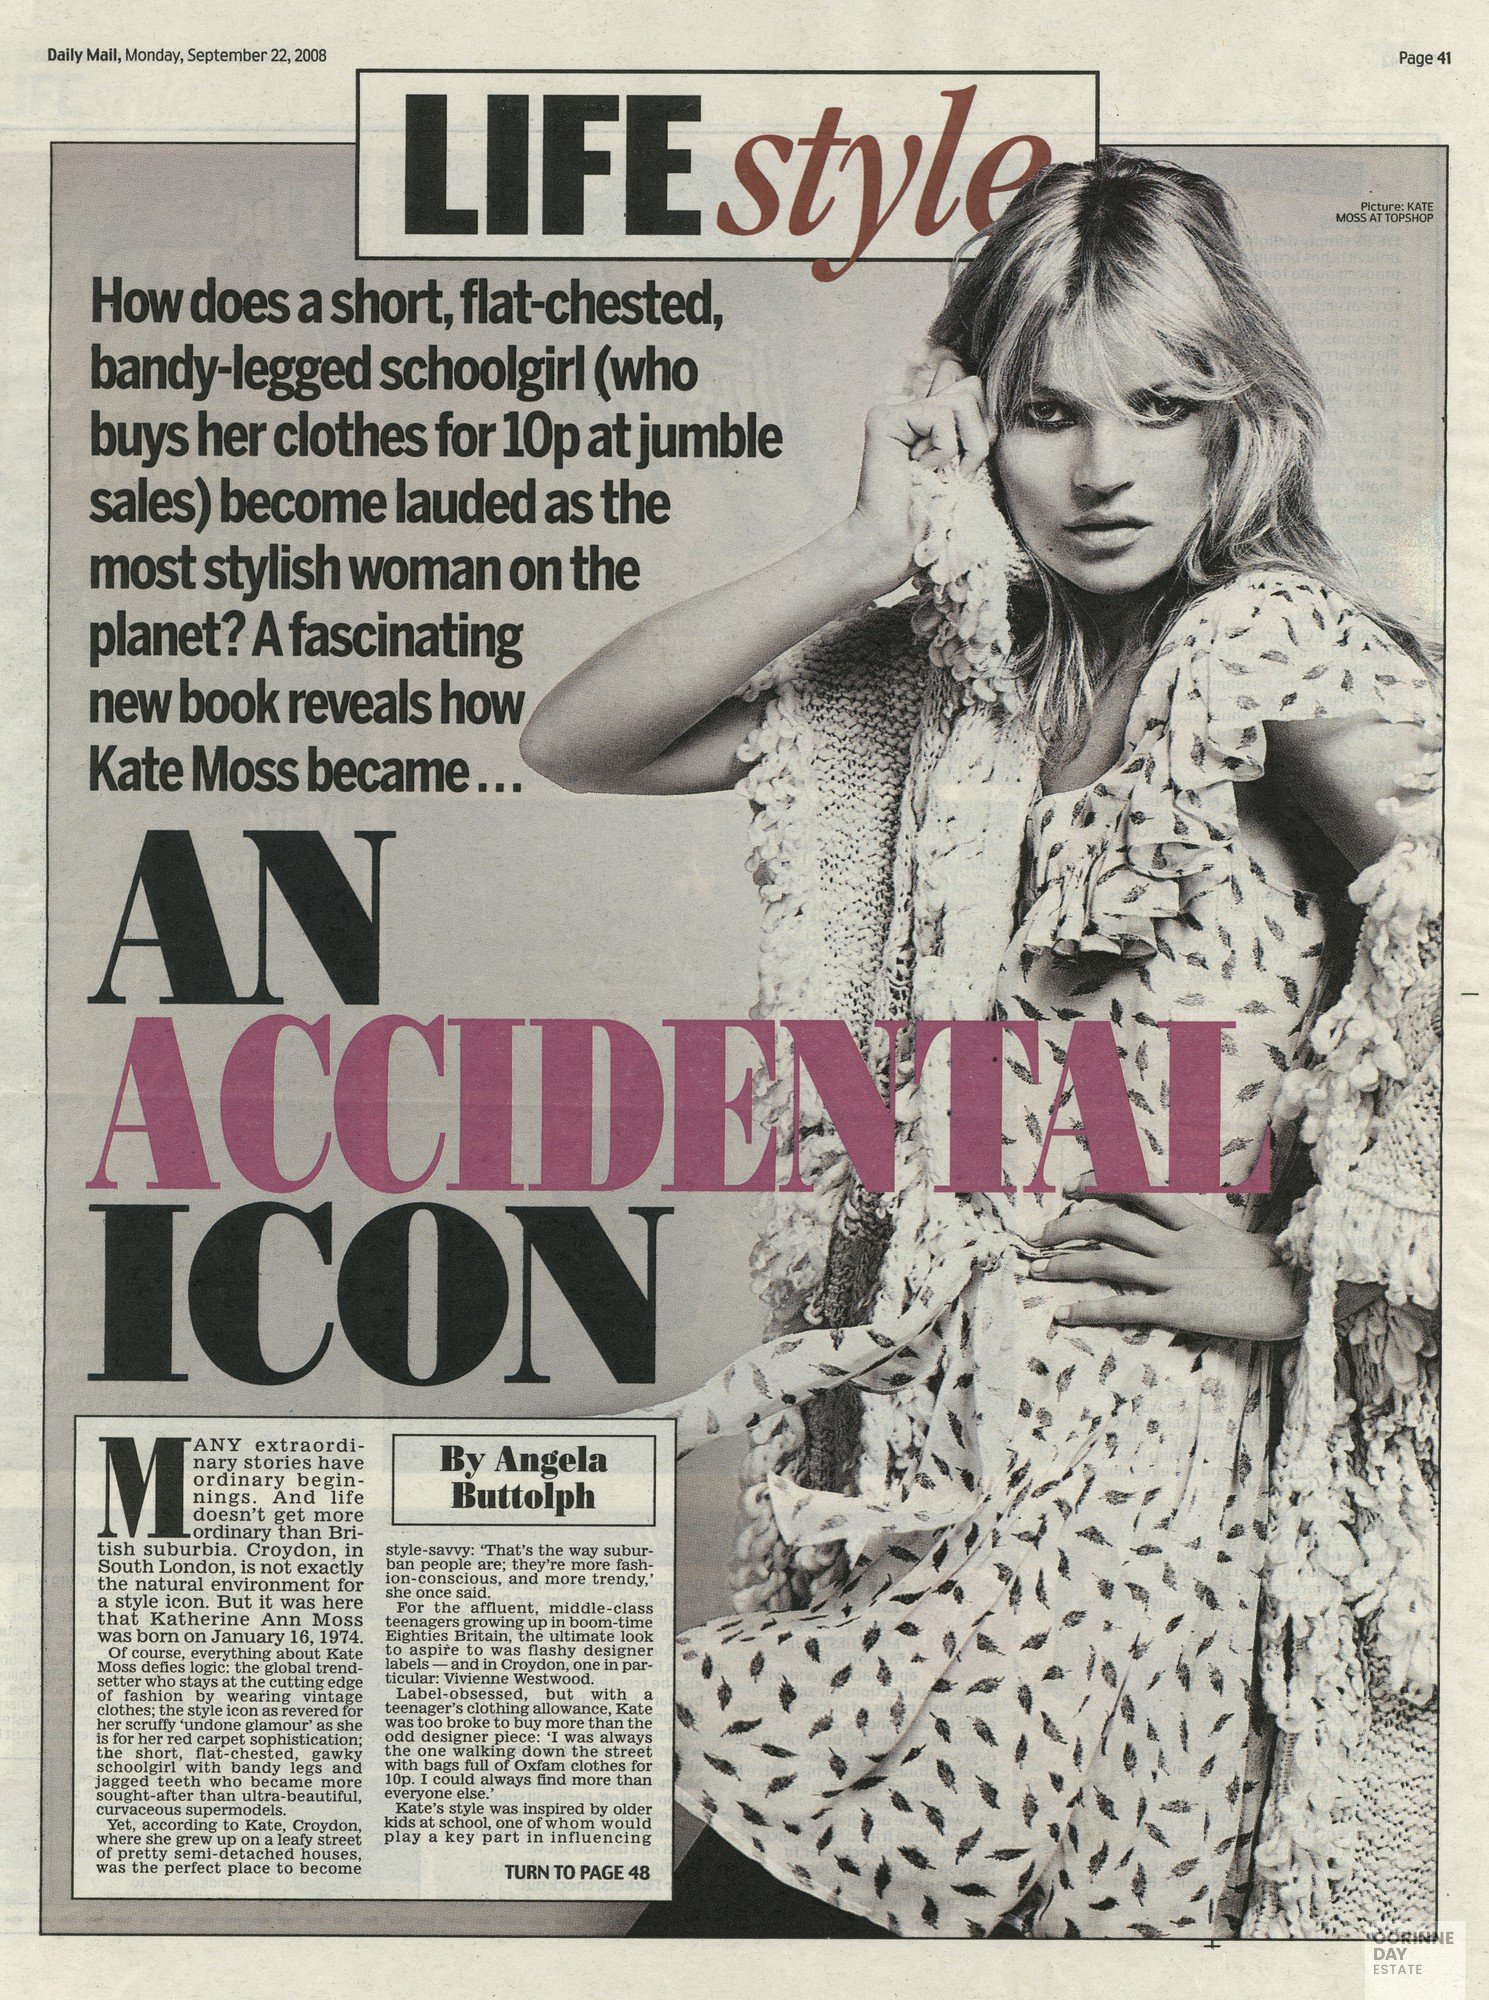 An Accidental Icon, Daily Mail, 22 Sep 2008 — Image 1 of 3